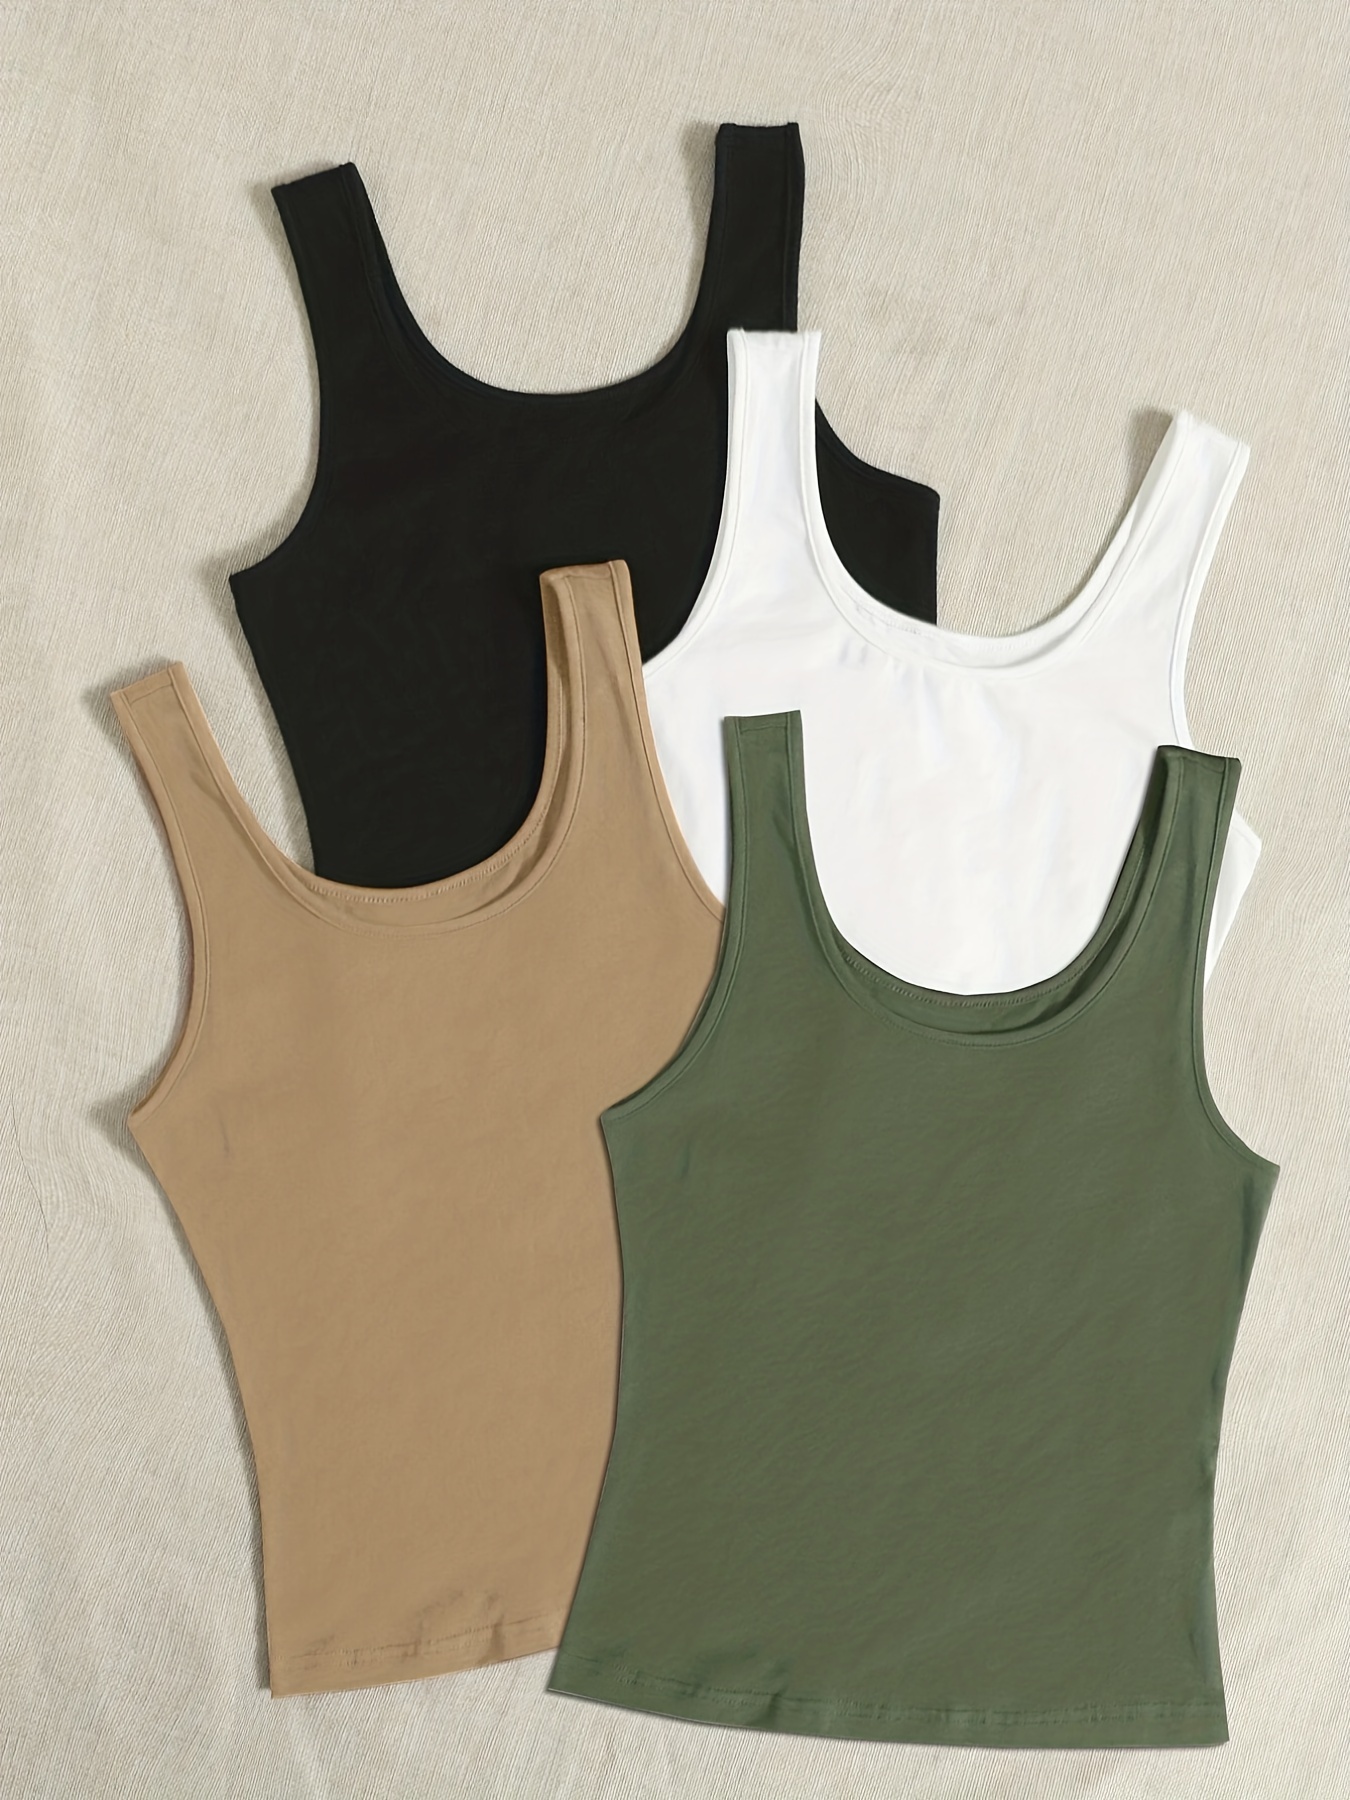 Best Tank Tops for Women That Are So Comfy and Versatile